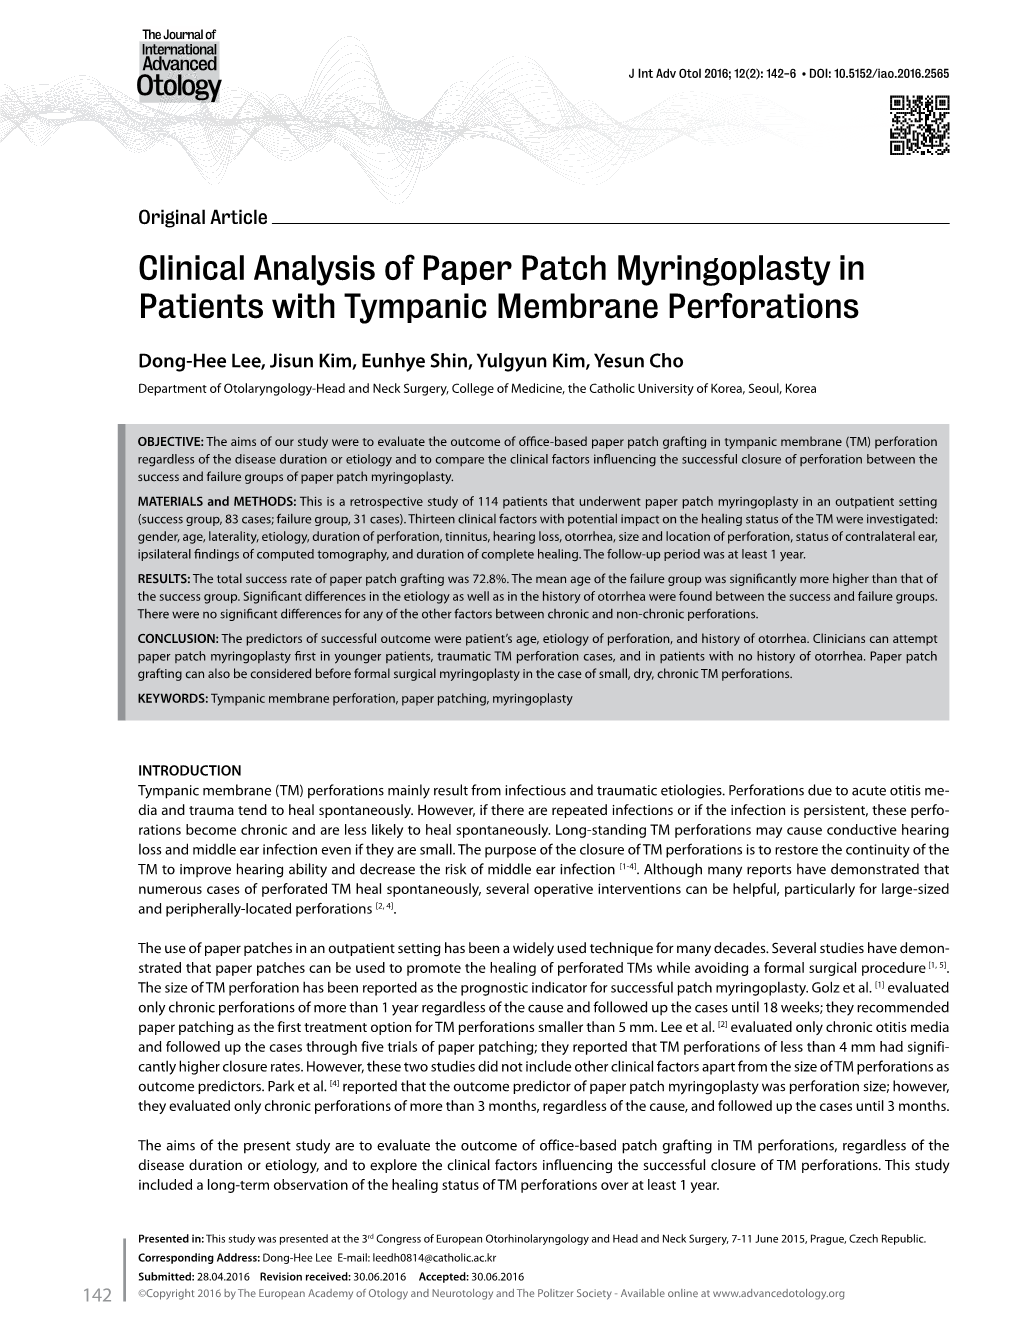 Clinical Analysis of Paper Patch Myringoplasty in Patients with Tympanic Membrane Perforations